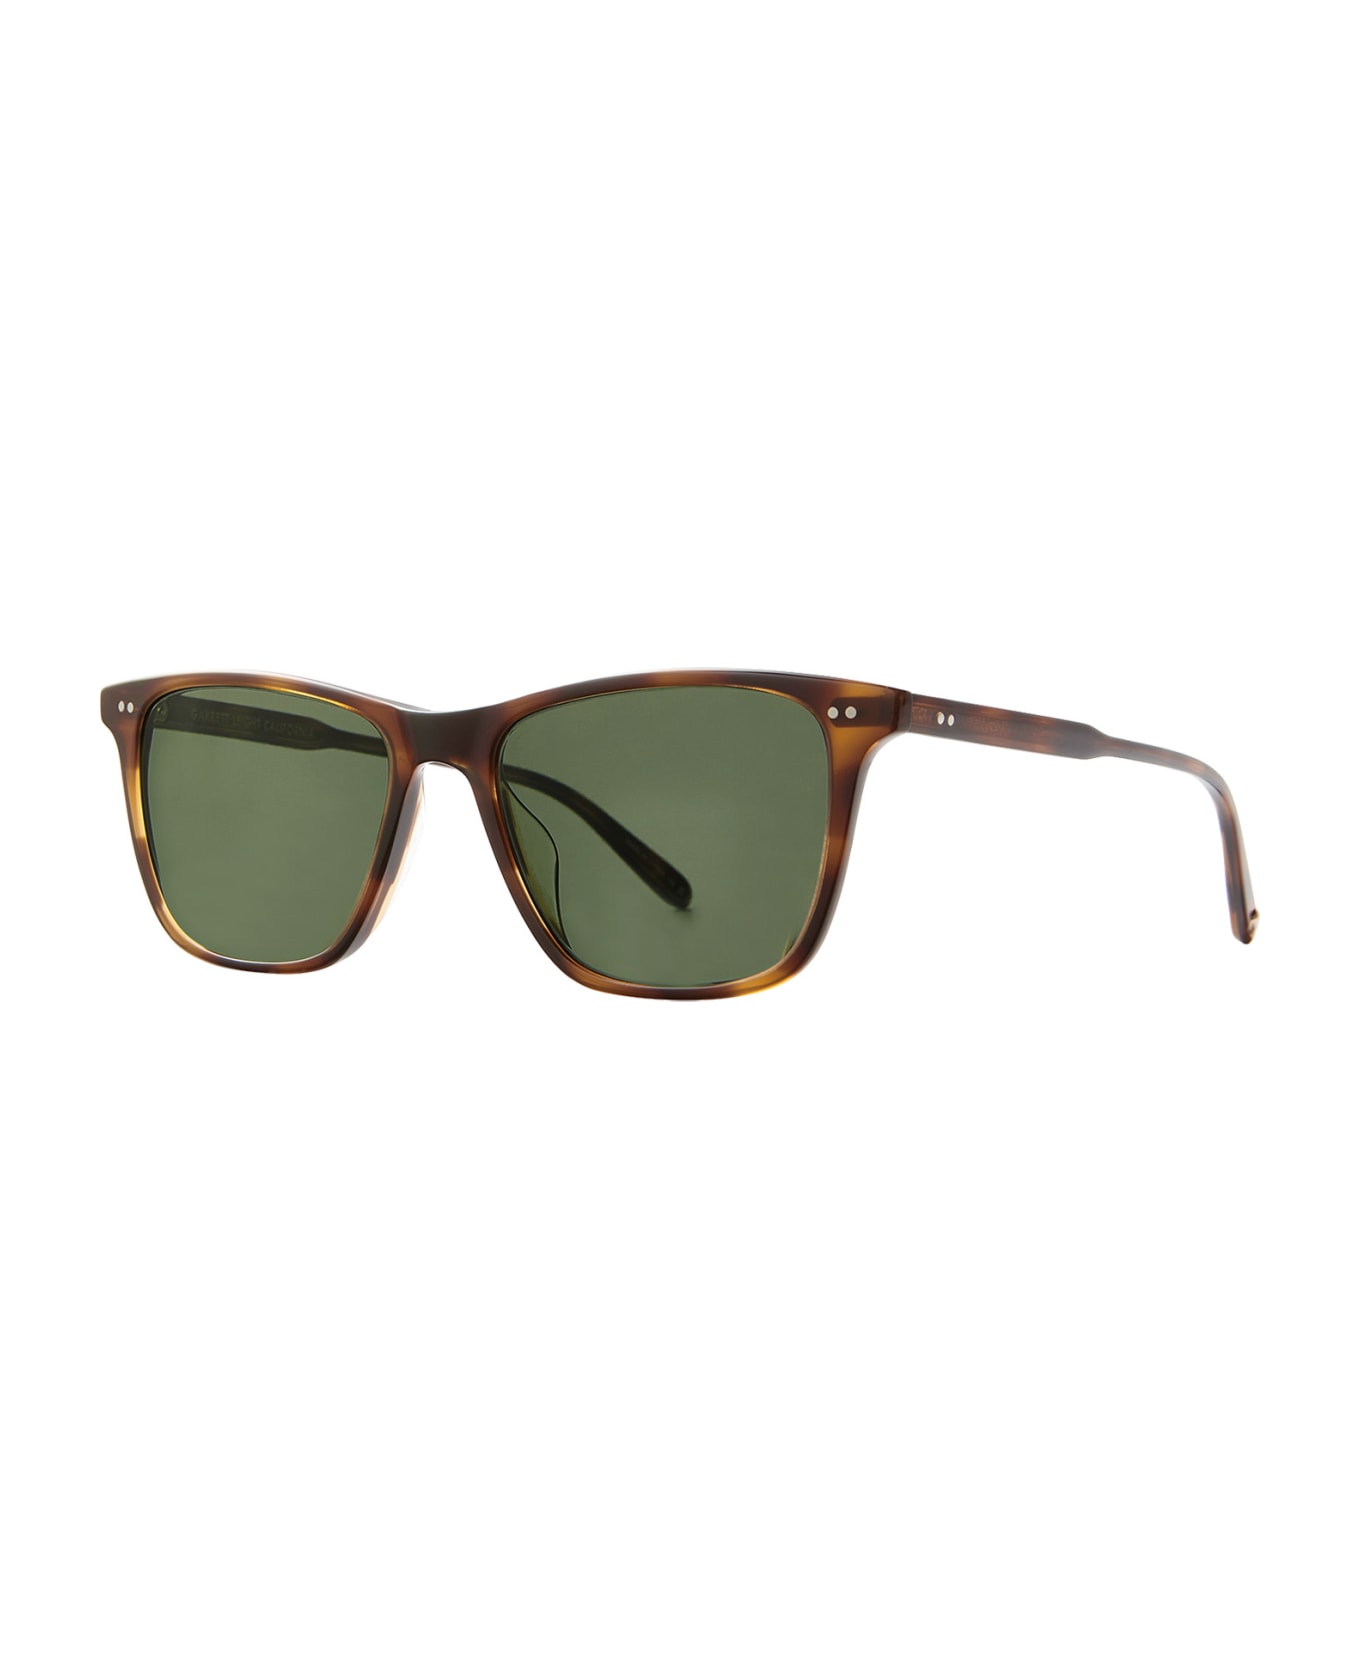 Garrett Leight Hayes Sun Spotted Brown Shell Sunglasses - Spotted Brown Shell サングラス